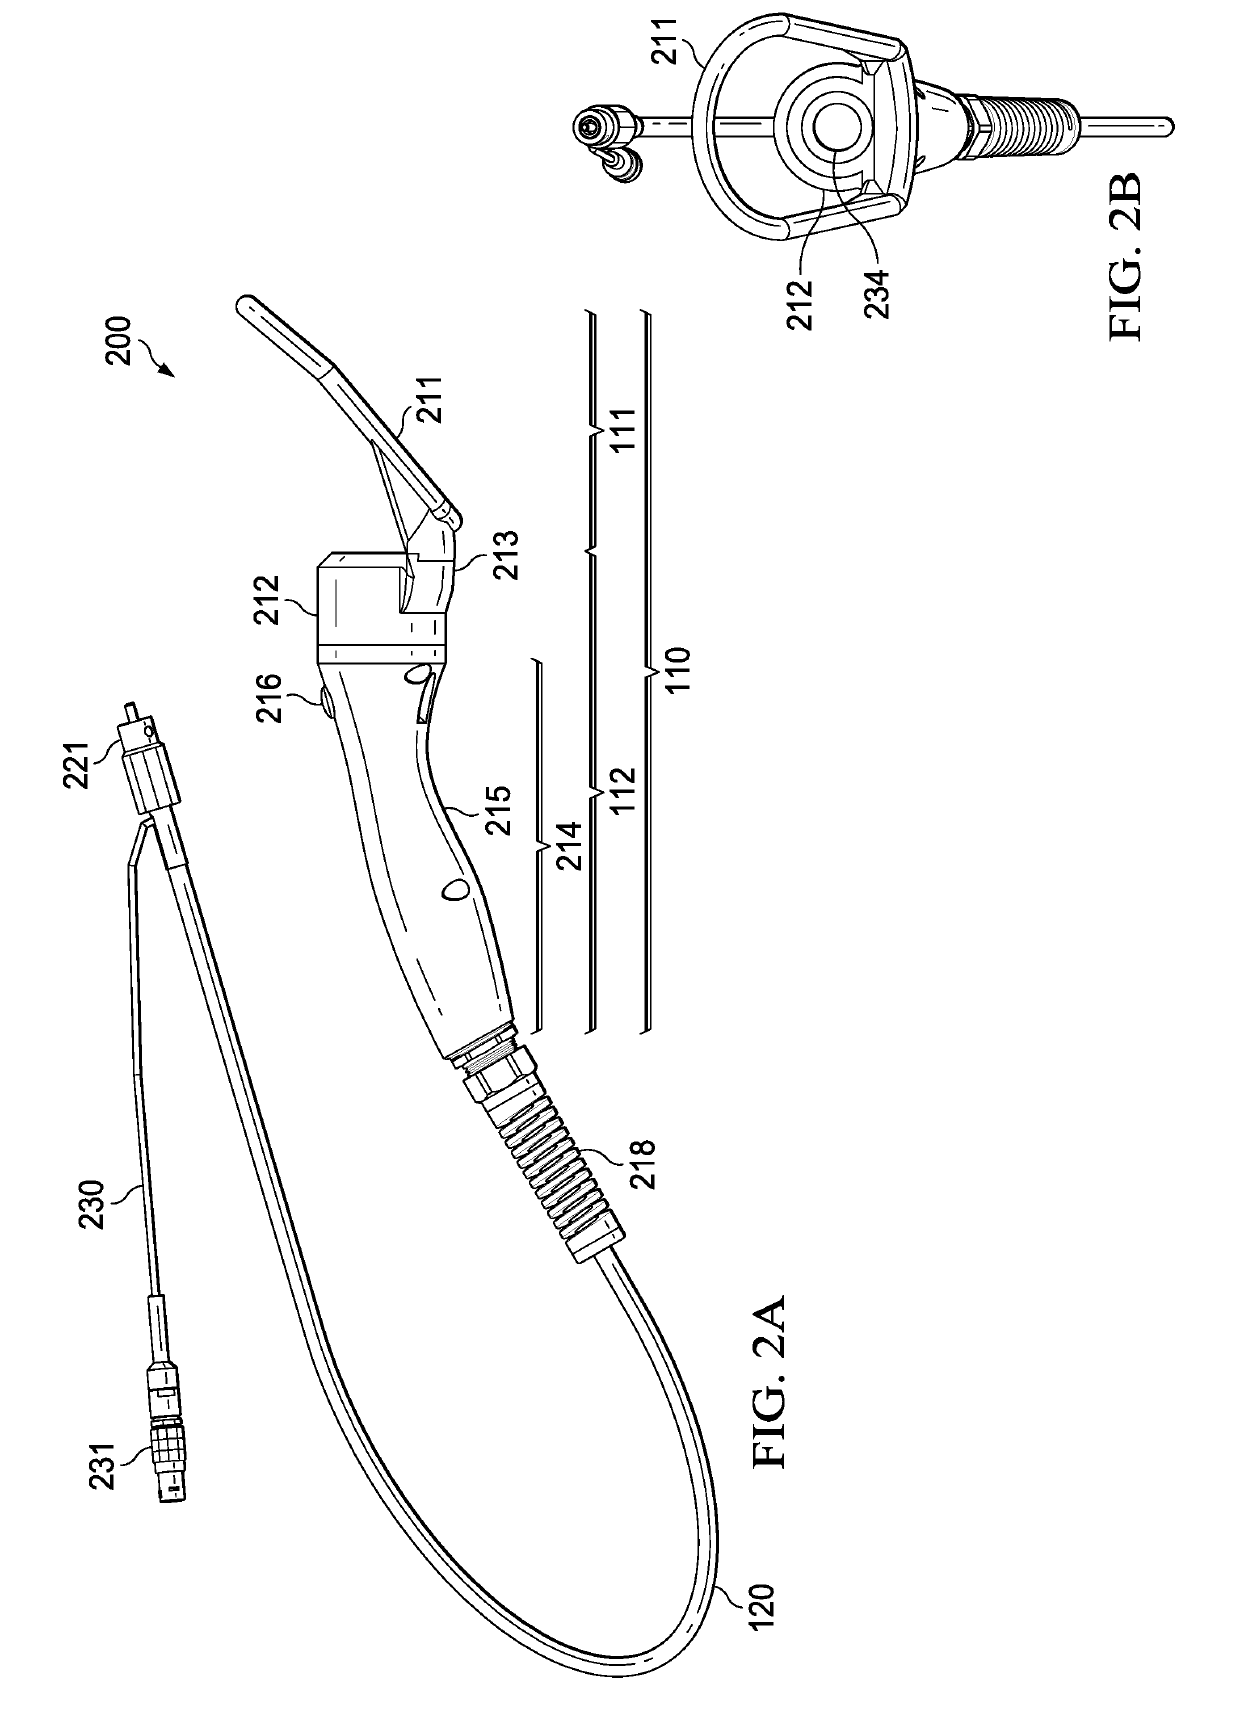 Handpiece Apparatus, System, and Method for Laser Treatment